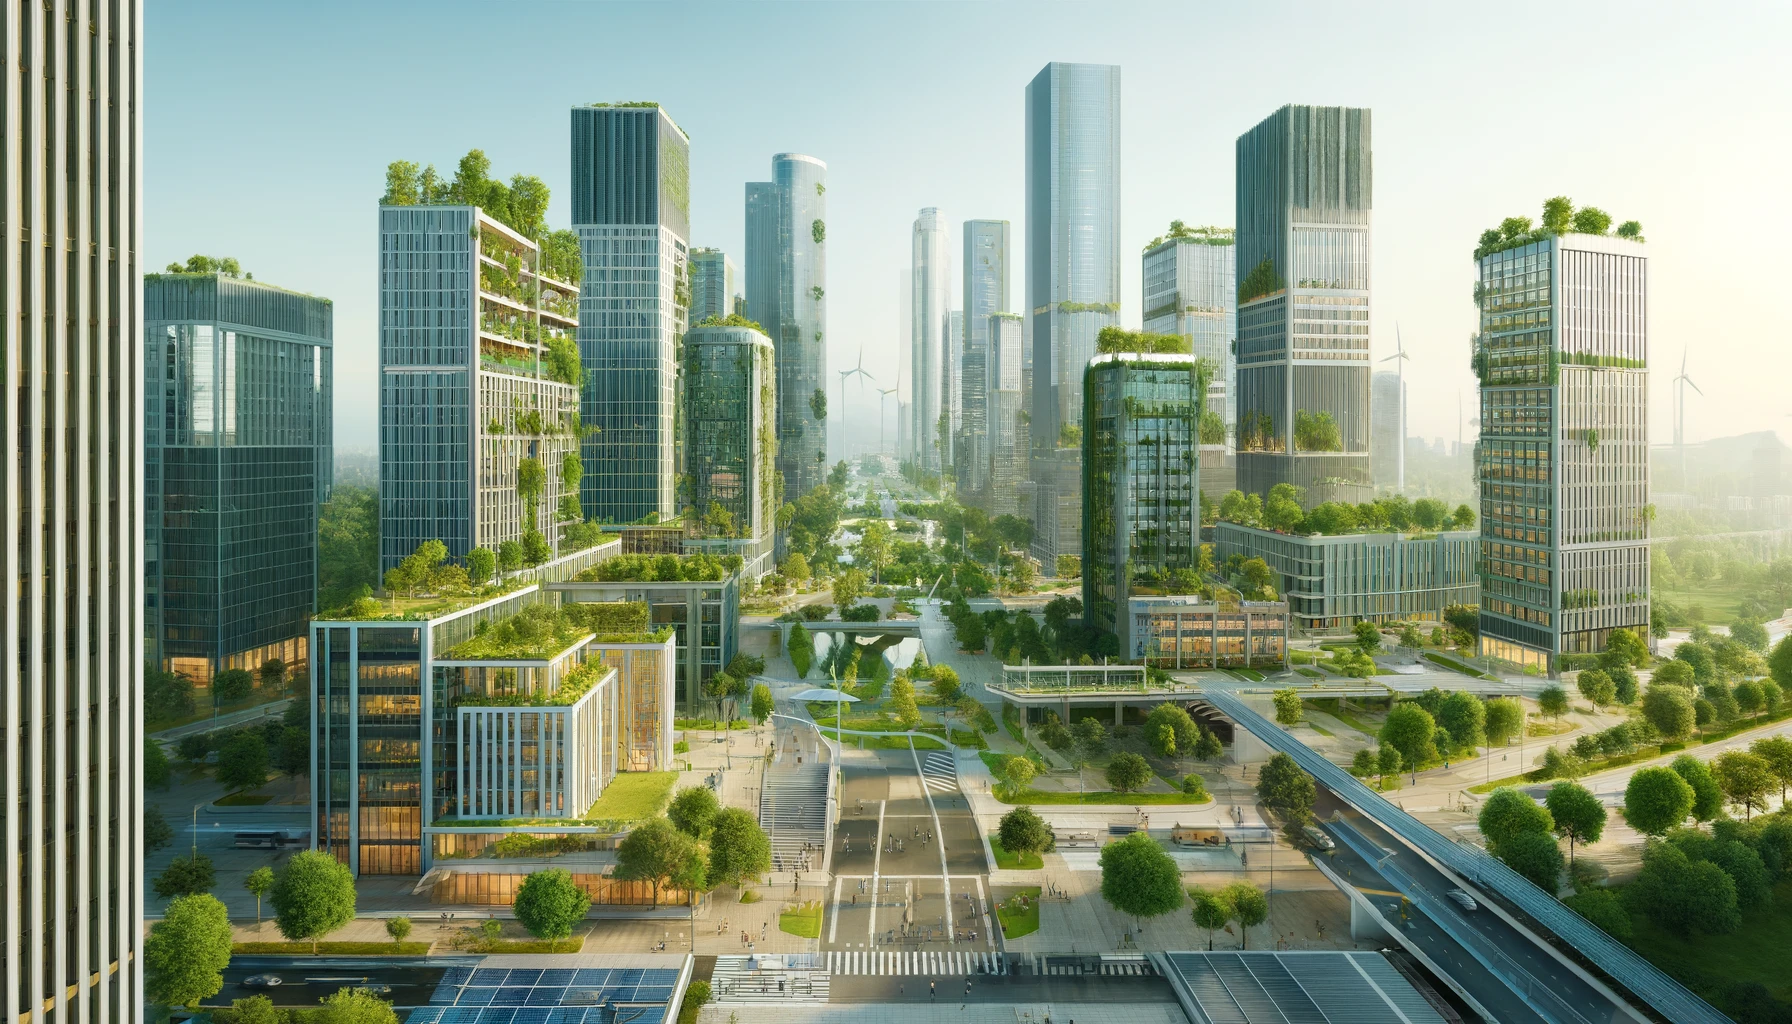 A modern cityscape with sustainable buildings featuring green roofs, plant-covered facades, solar panels, and wind turbines, set among pedestrian-friendly walkways, green parks, and eco-friendly public transport.